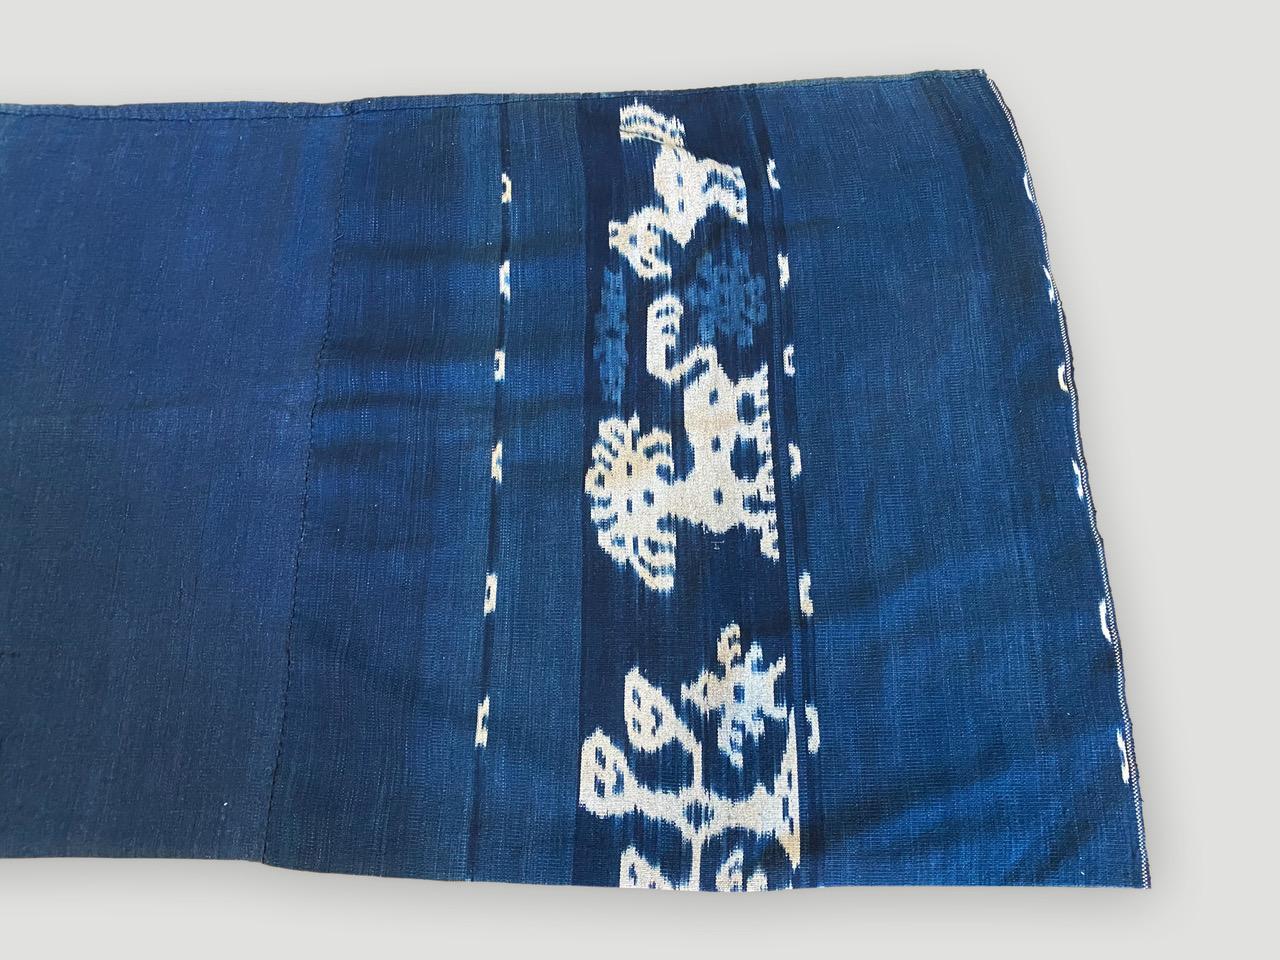 Lau are the tubular skirts worn by women. The same symbols that appear on a man’s hinggi reappear on the women’s skirts, but the range of techniques used often extend beyond ikat alone. 

On the one side the weave is more faded as shown in last few